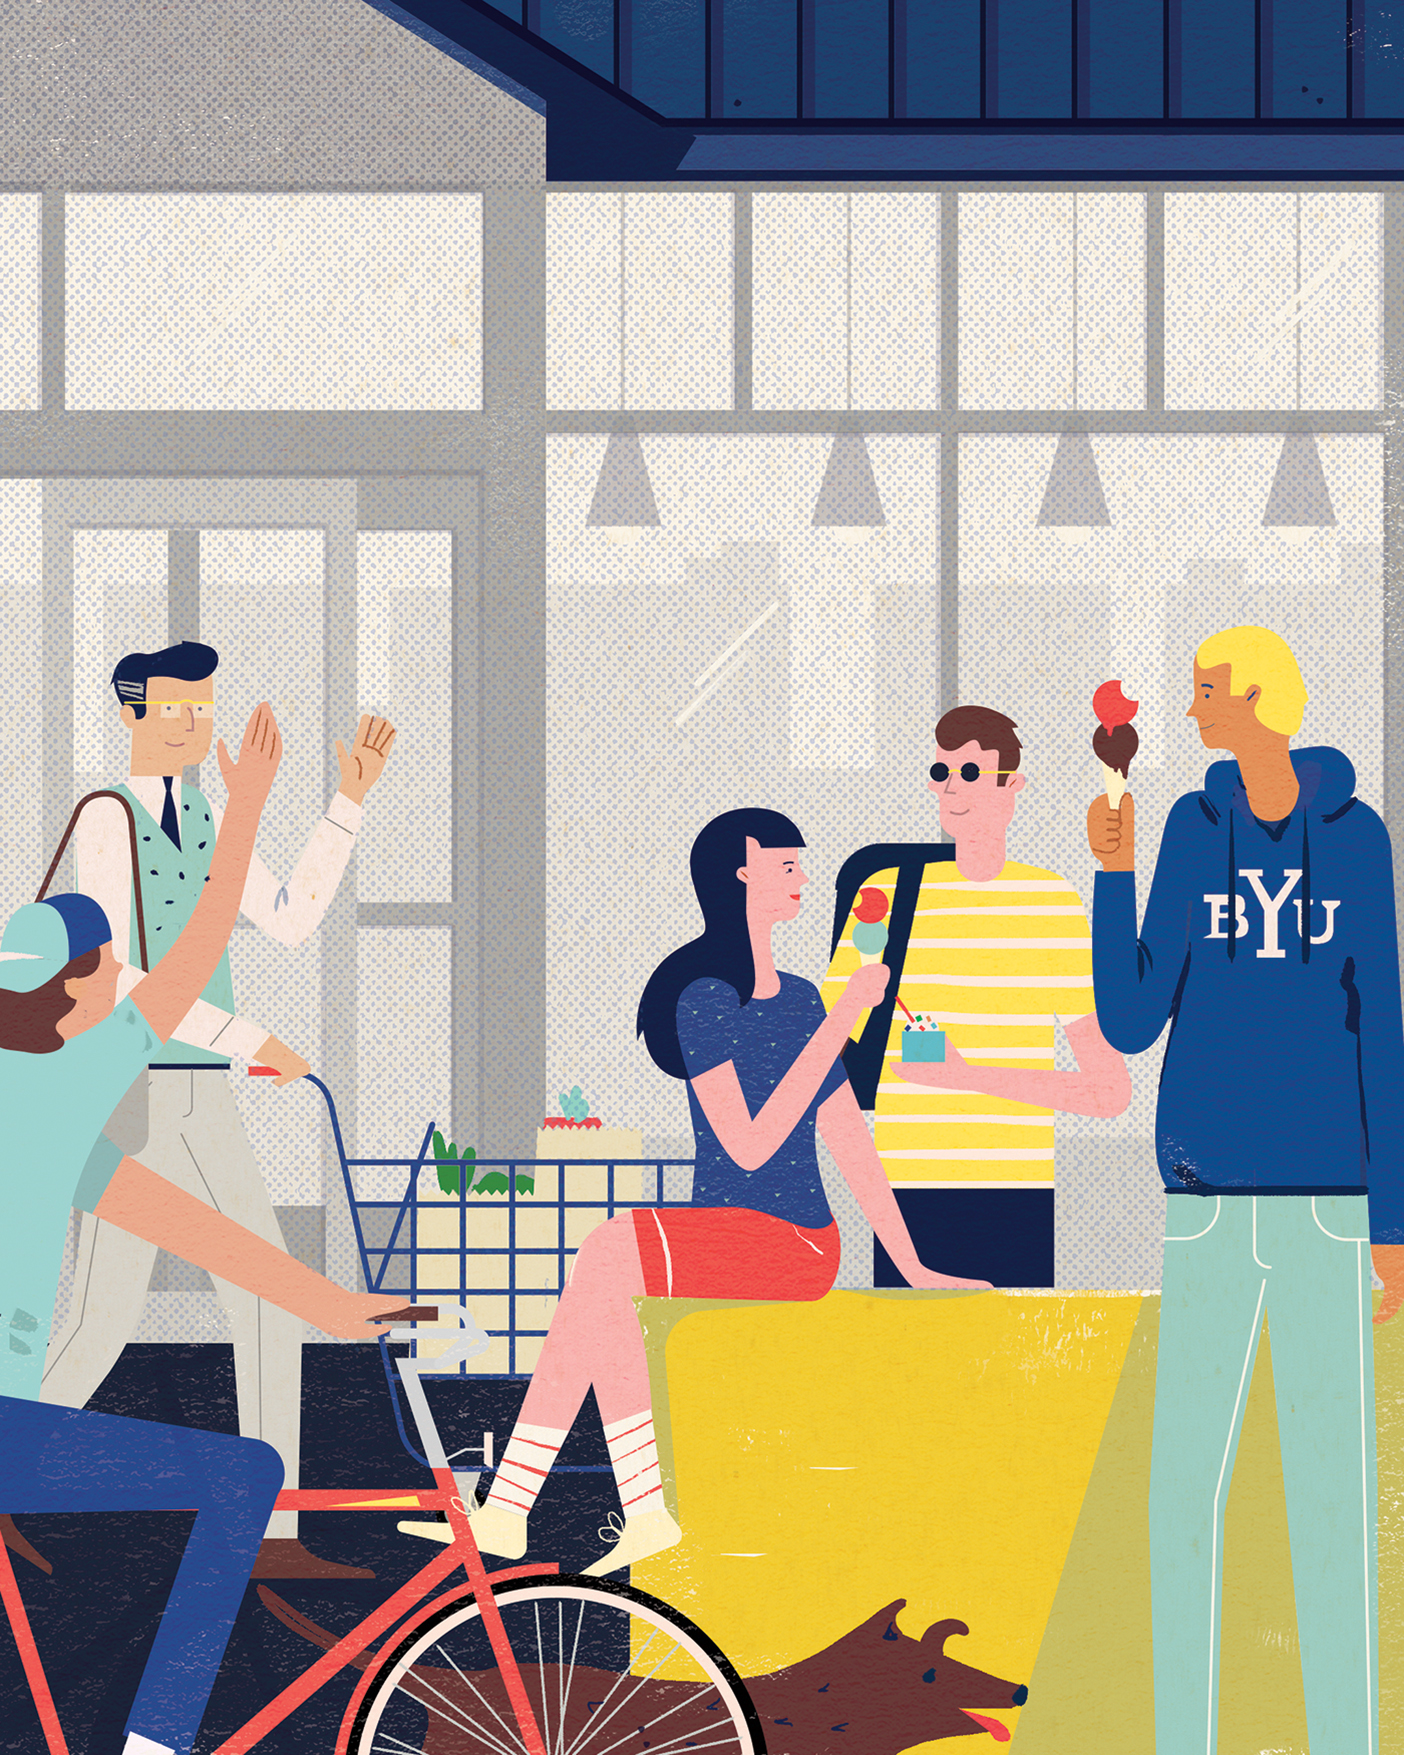 An illustration of students gathered outside a storefront eating ice cream.